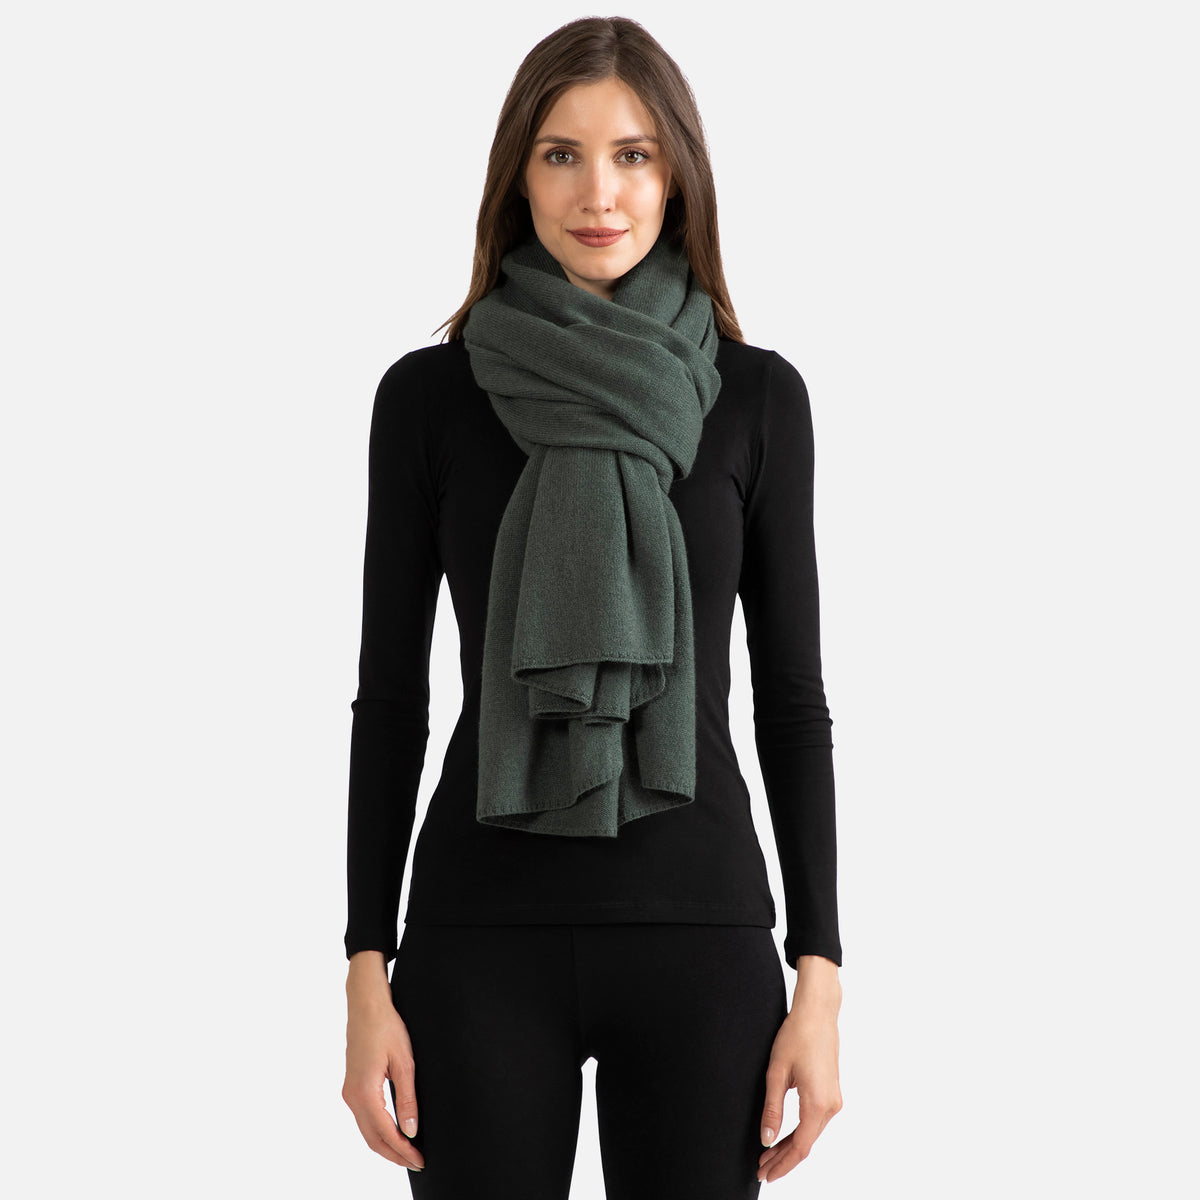 Picture of a woman wearing a dark green cashmere jersey knitted oversize scarf or travel wrap.